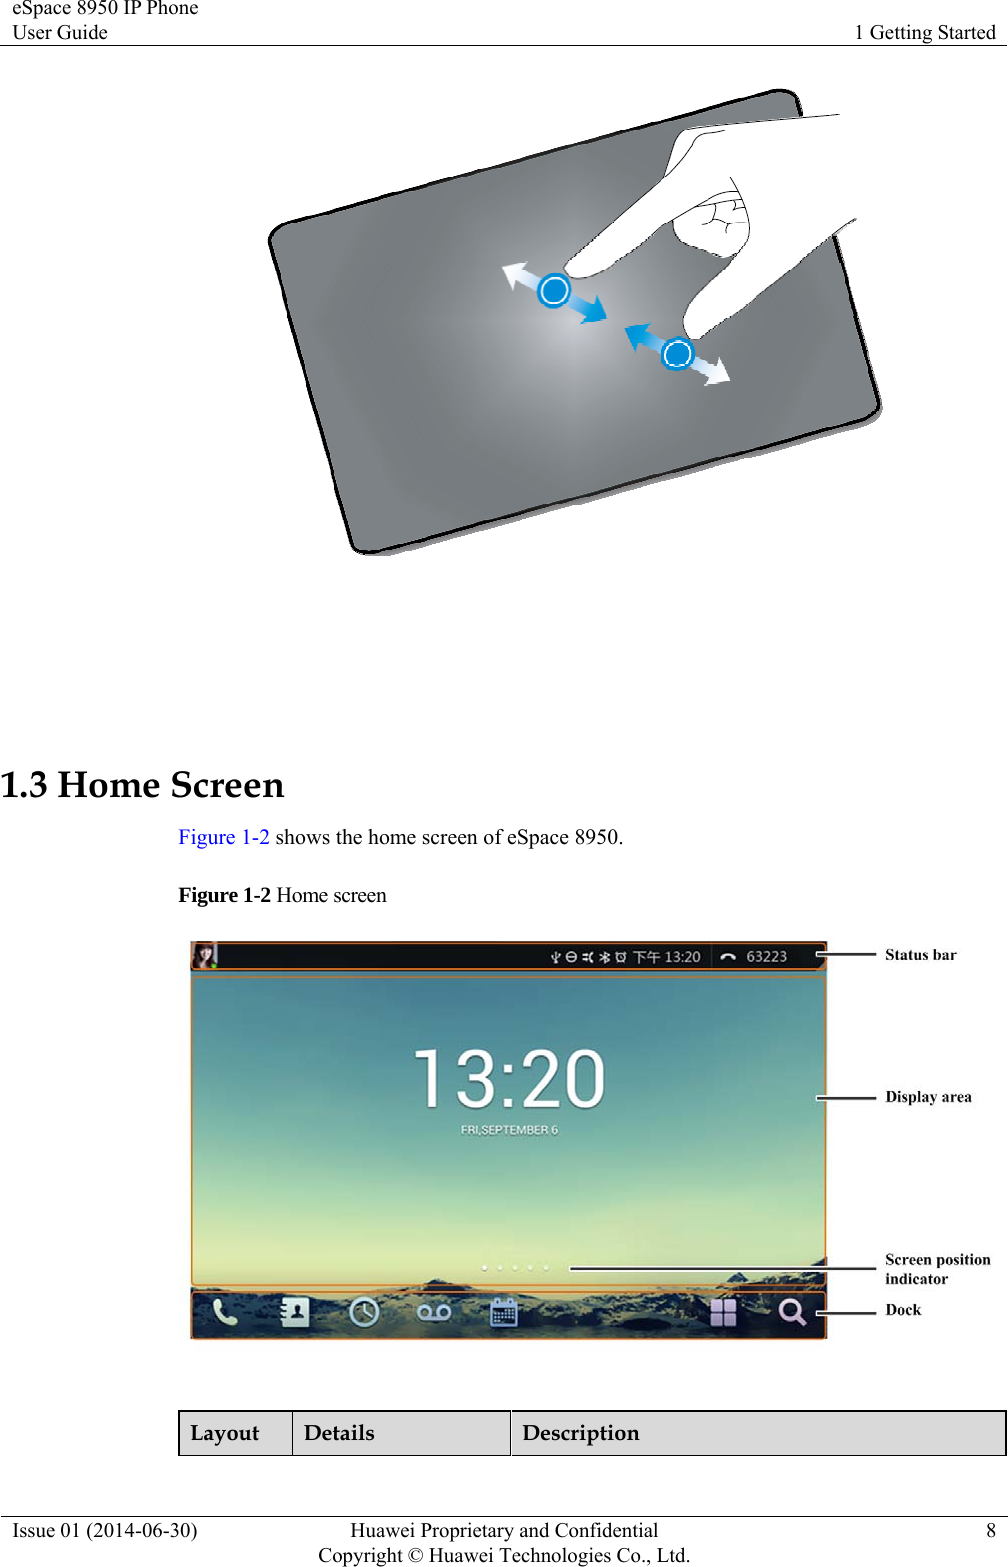 eSpace 8950 IP Phone User Guide  1 Getting Started Issue 01 (2014-06-30)  Huawei Proprietary and Confidential         Copyright © Huawei Technologies Co., Ltd.8   1.3 Home Screen Figure 1-2 shows the home screen of eSpace 8950. Figure 1-2 Home screen   Layout  Details  Description 